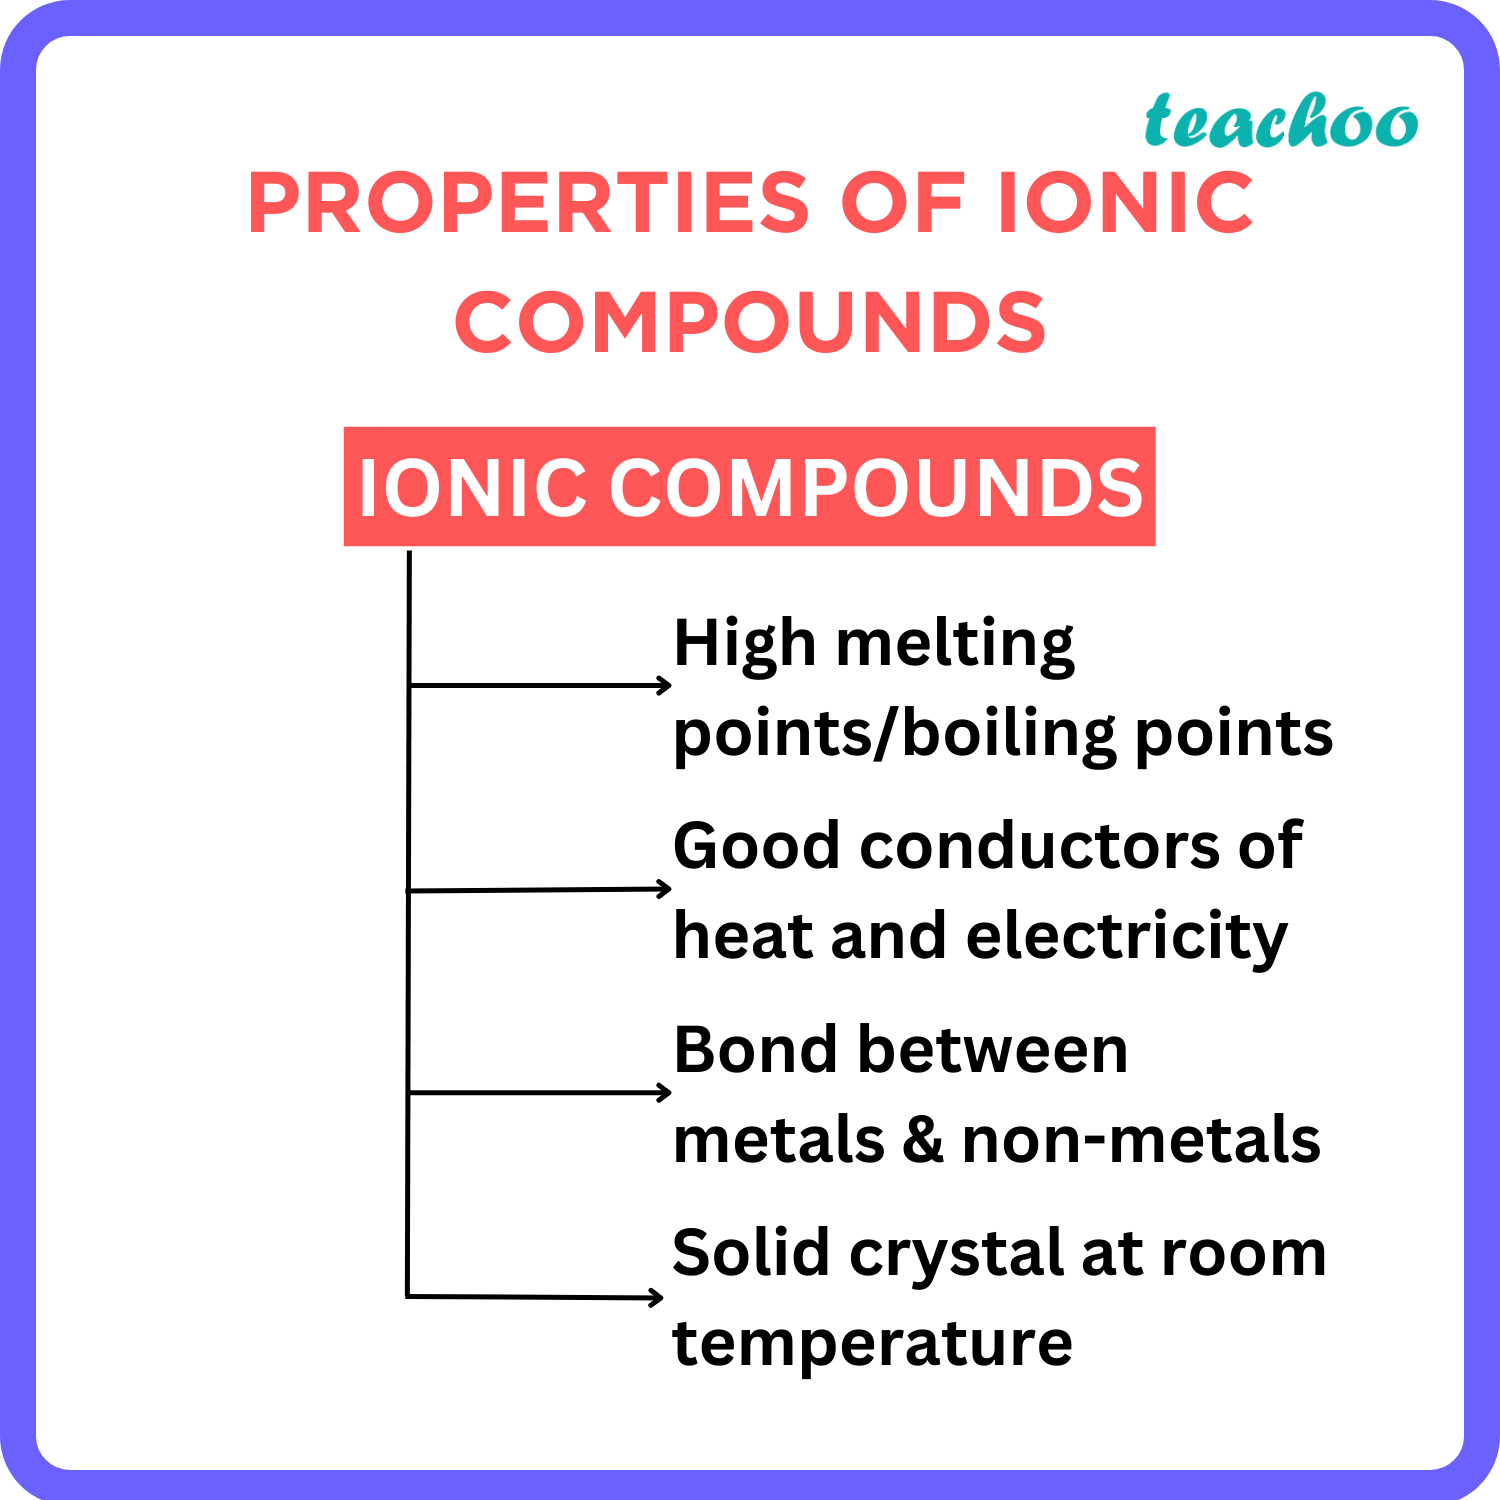 Properties of Ionic Compounds - Teachoo.png